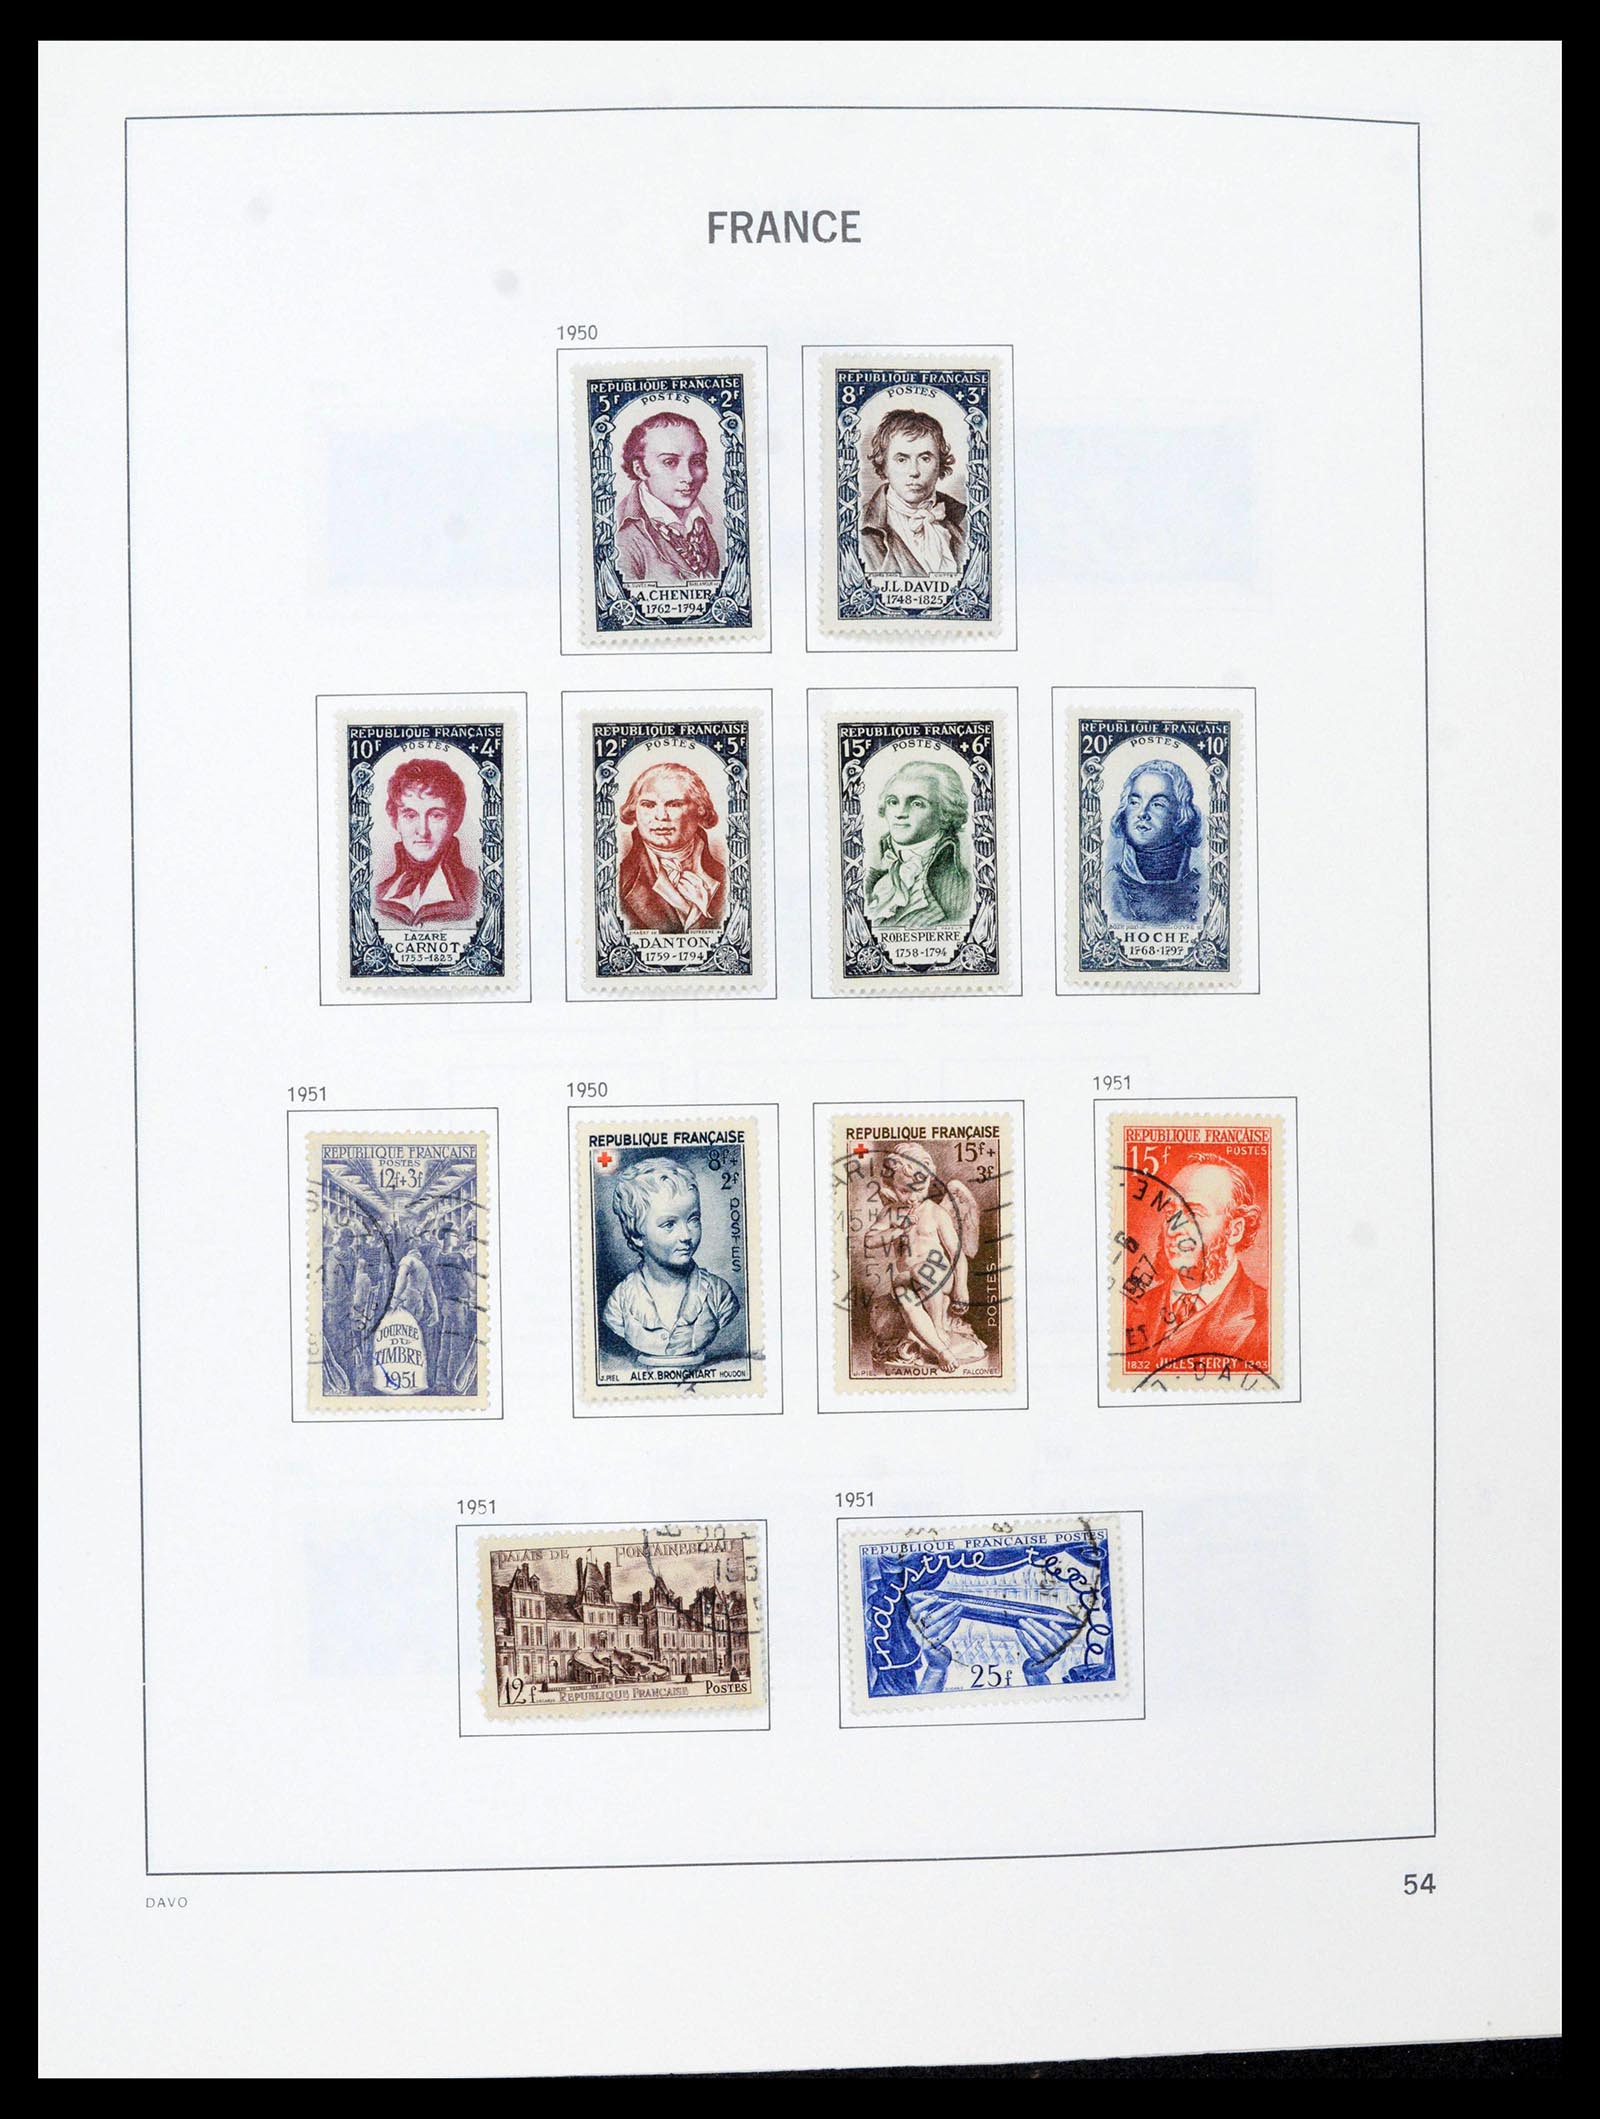 39164 0054 - Stamp collection 39164 France 1849-1981.